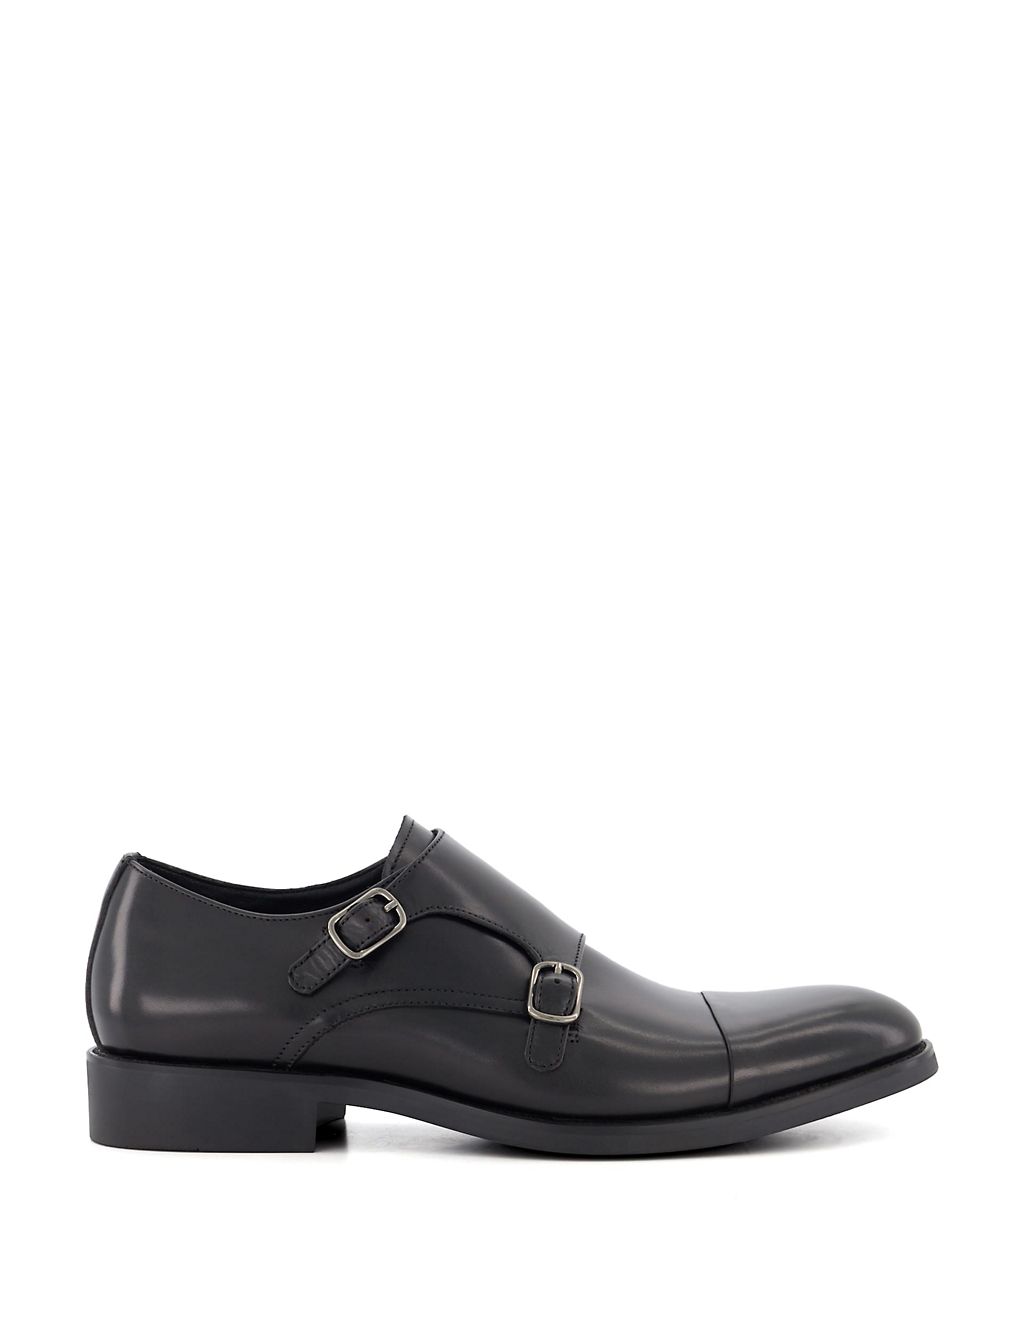 Leather Double Monk Strap Shoes 3 of 3